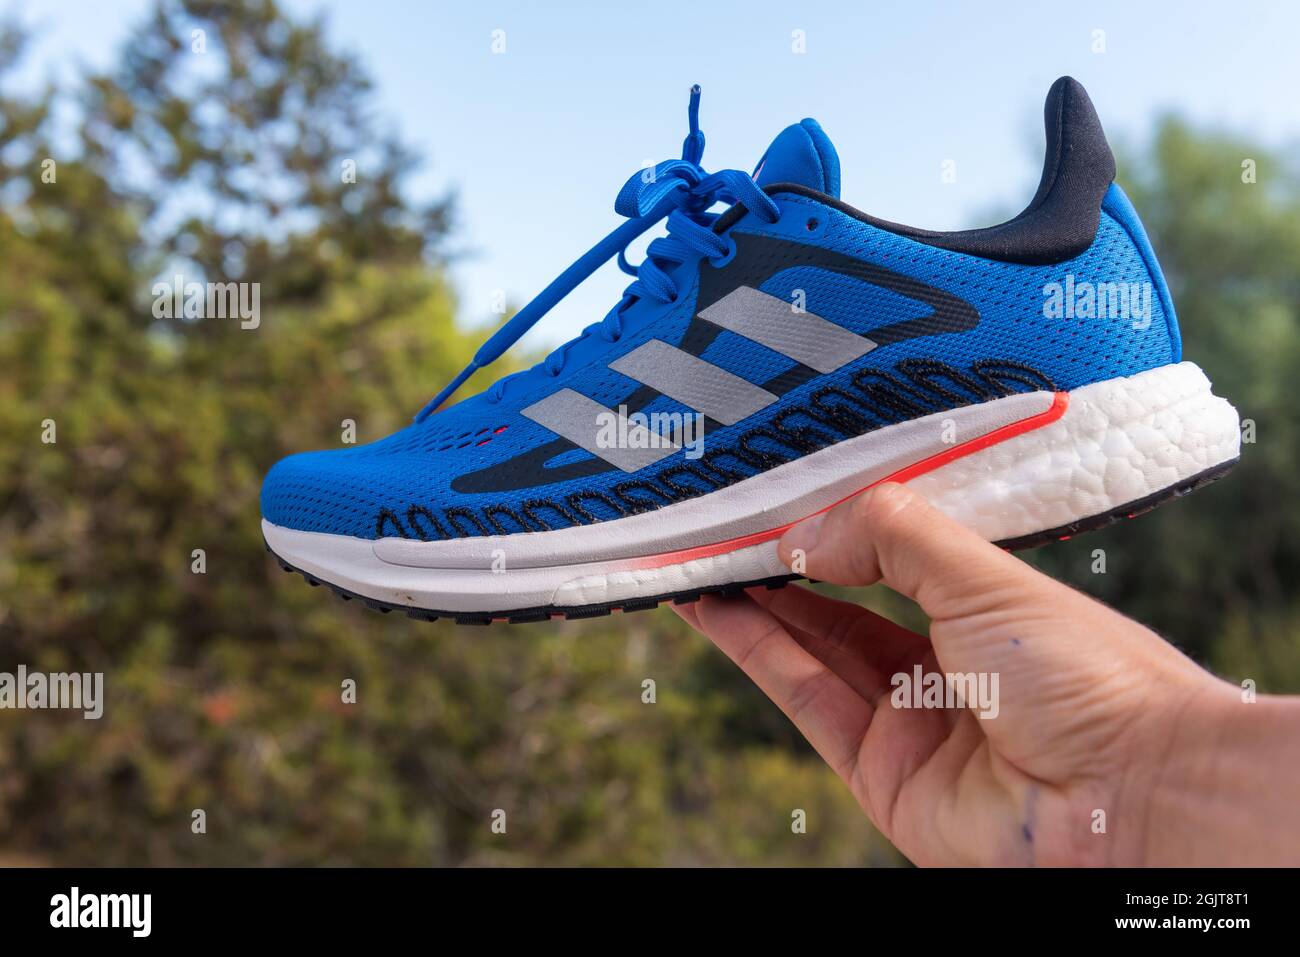 Page 2 - Adidas Shoe High Resolution Stock Photography and Images - Alamy